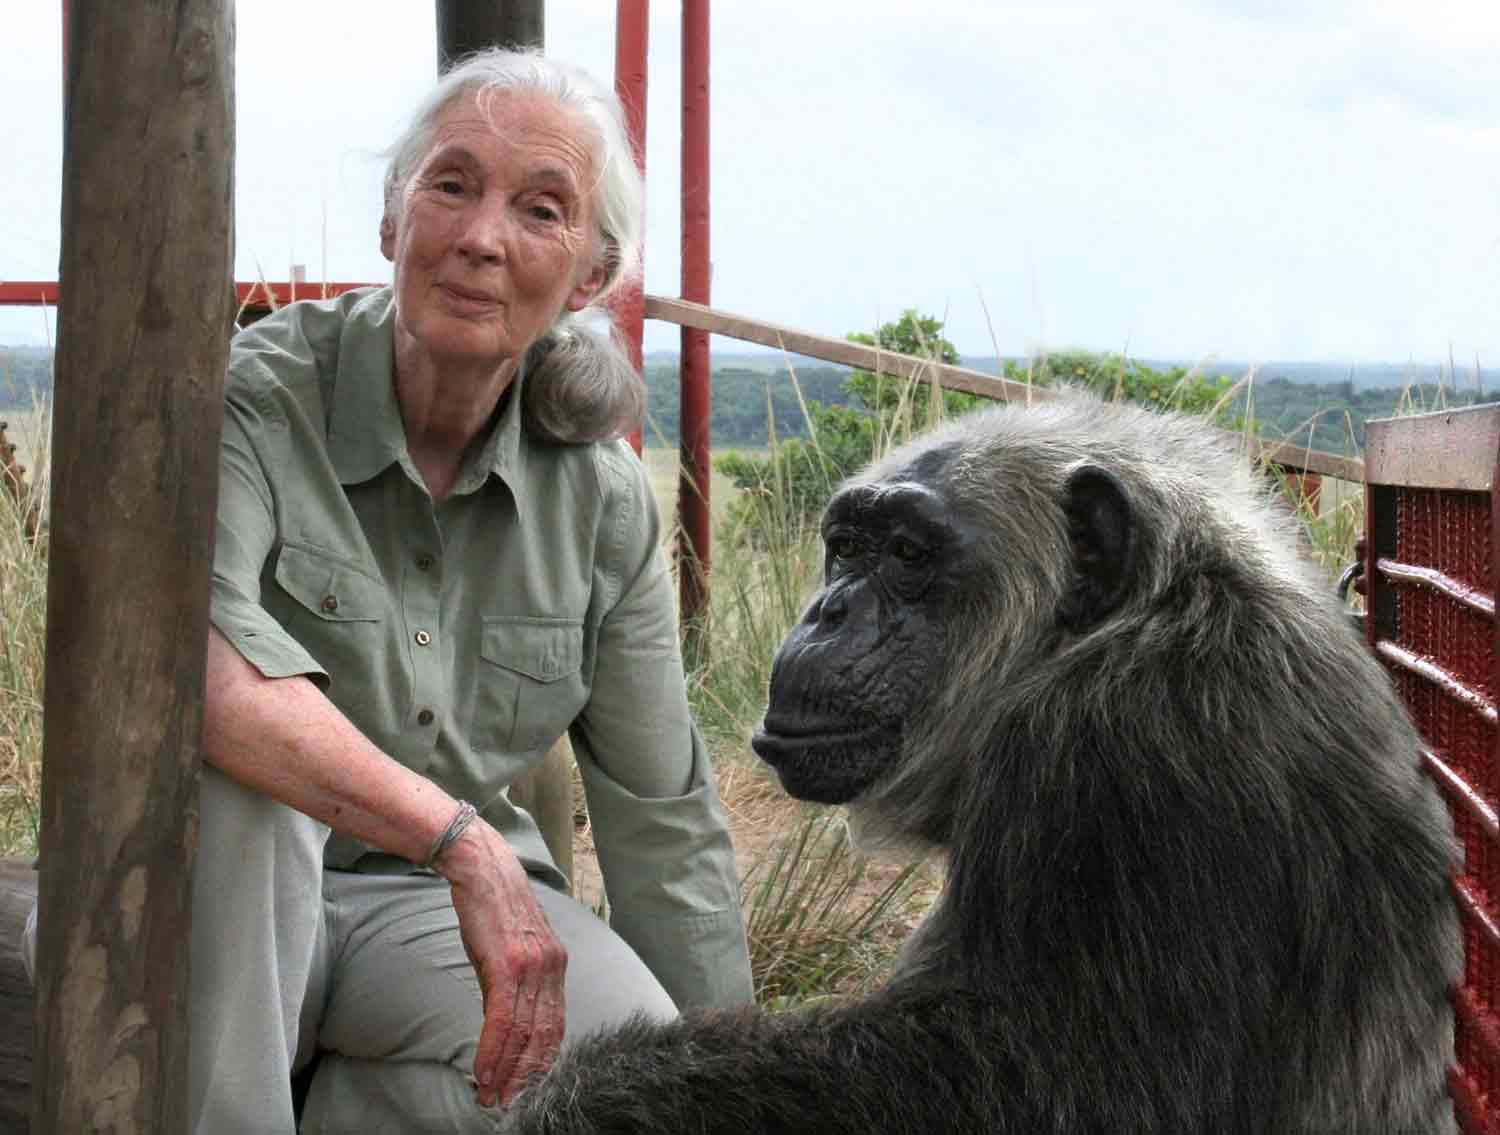 Jane Goodall smiles at the camera as she sits on the ground with a chimpanzee.